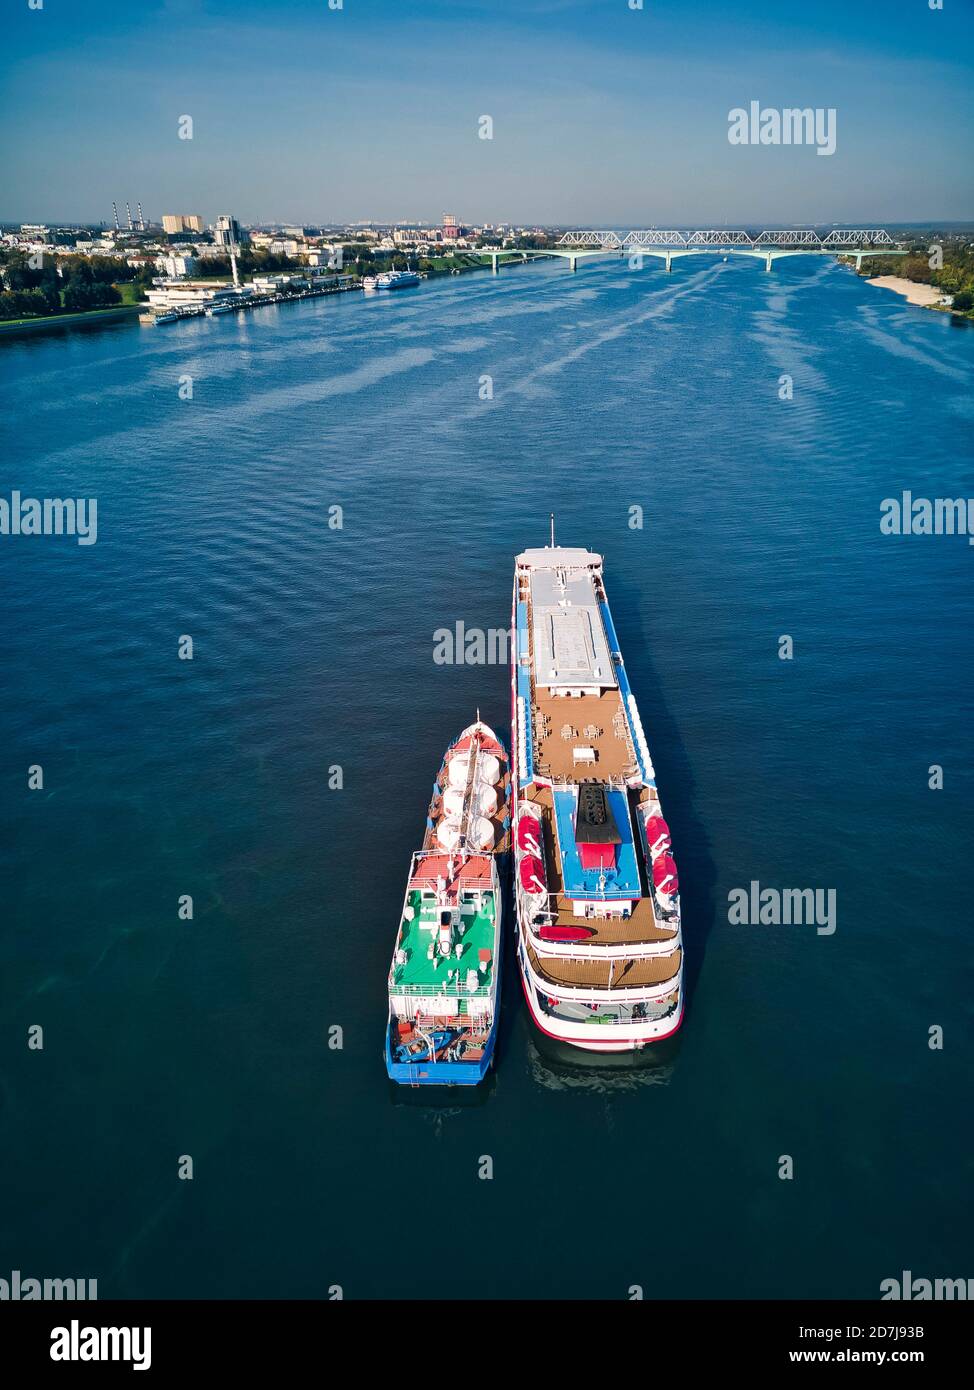 Barge refueling recreational boat on Volga River against sky Stock Photo